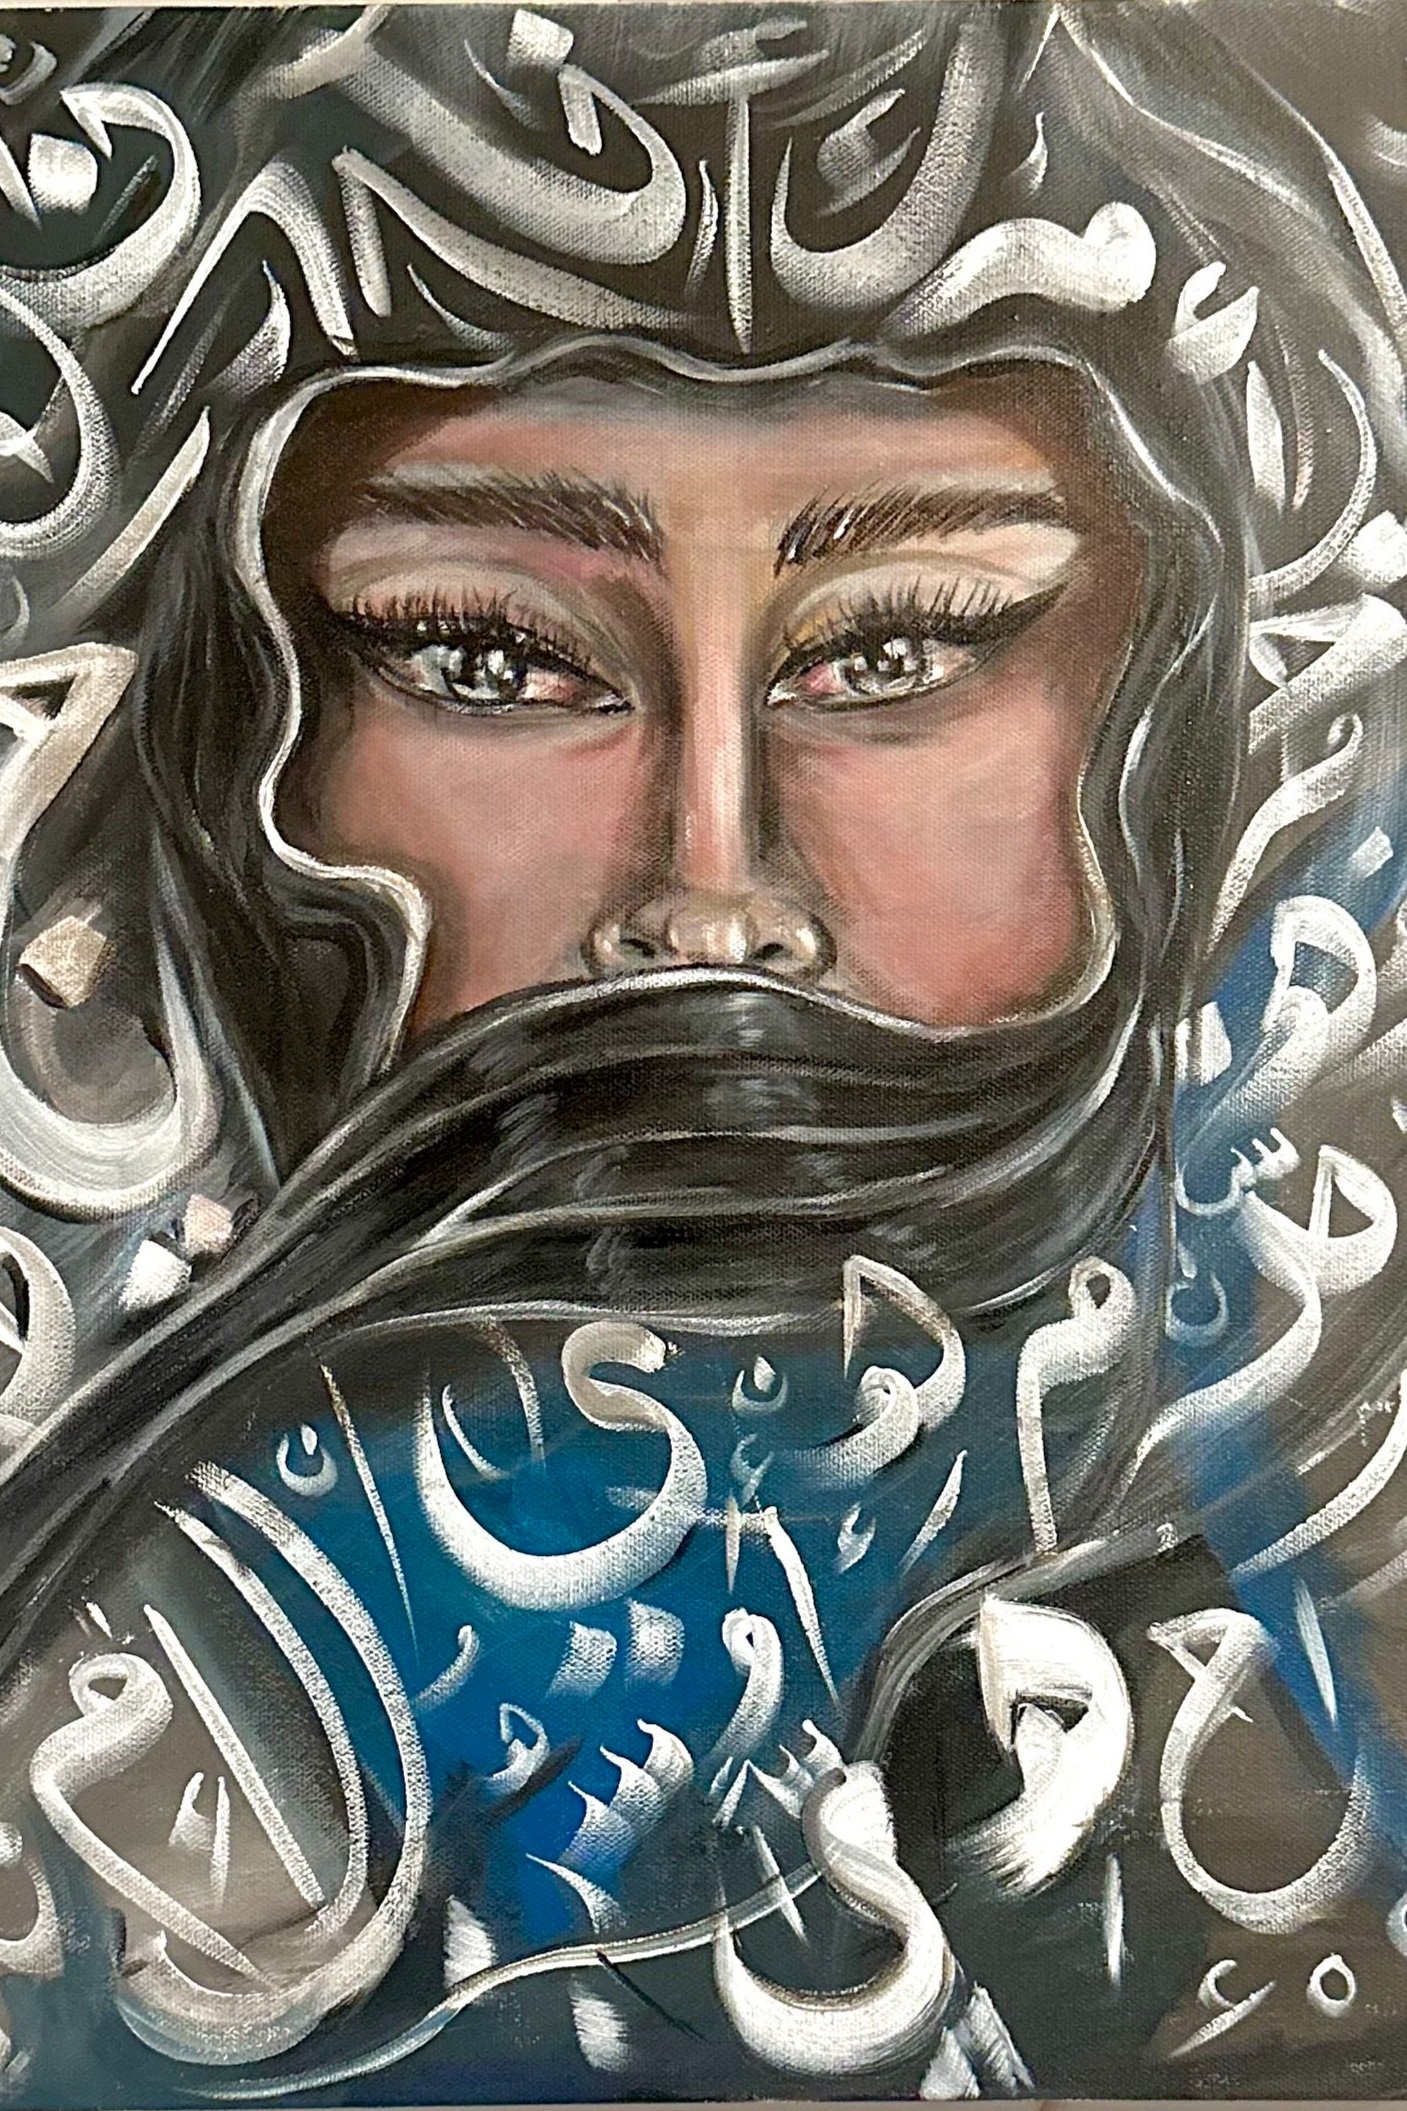   She  (with Arabic calligraphy) — acrylic on canvas, 16 x 20 x 0.8 inches 